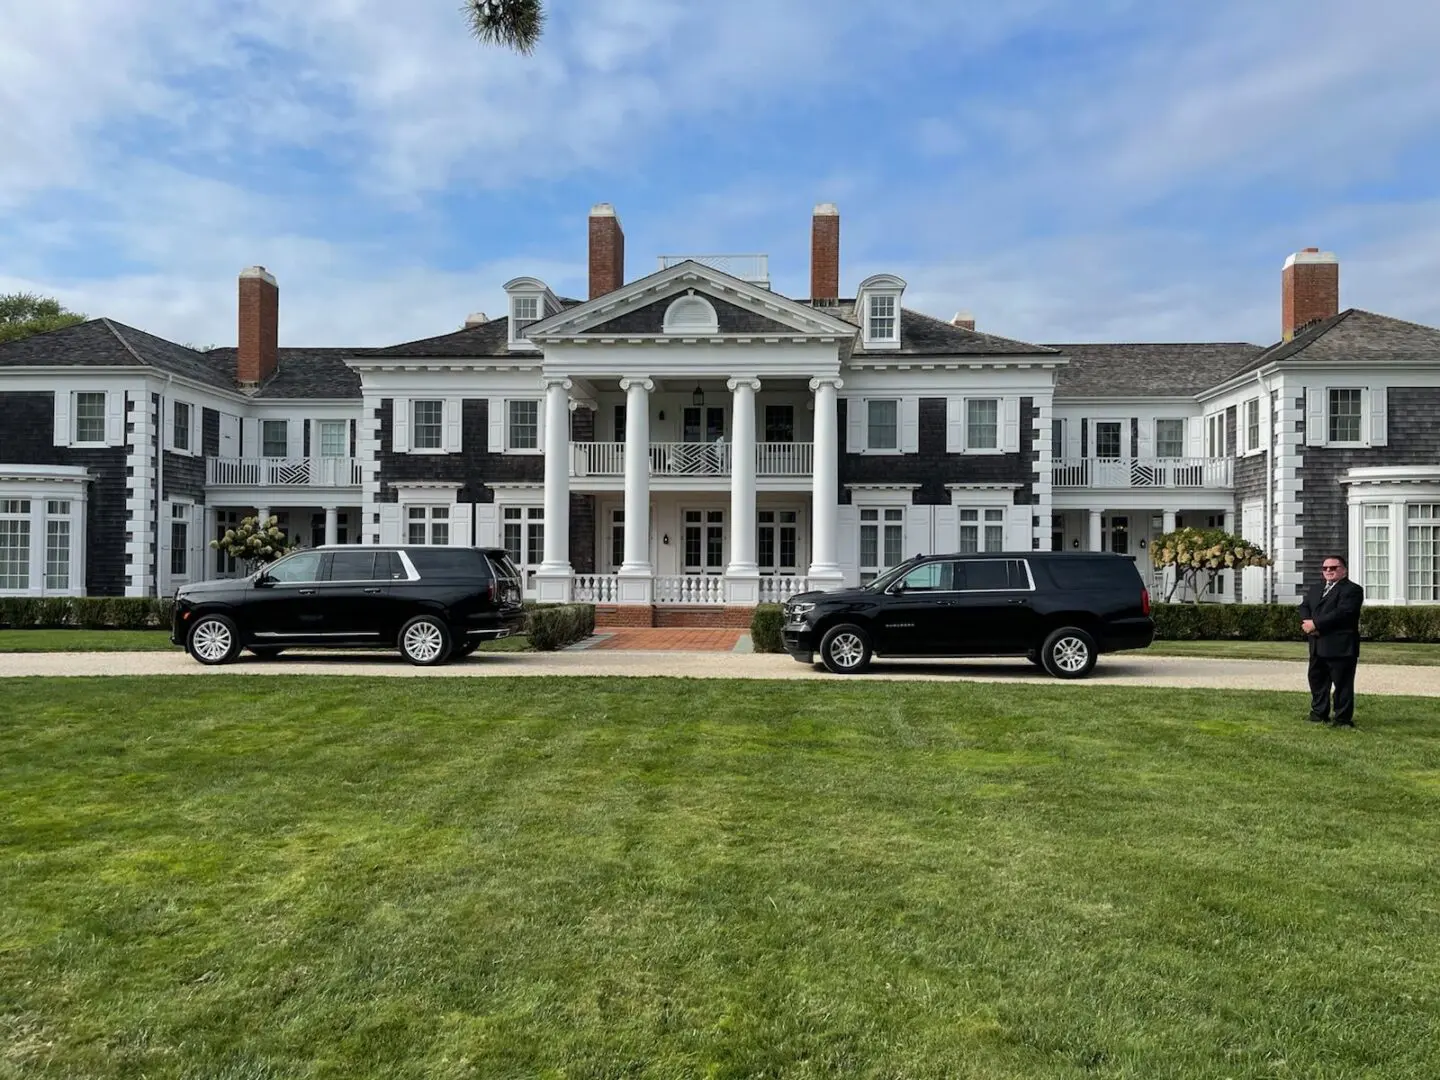 Two black cars parked in front of a large white house.